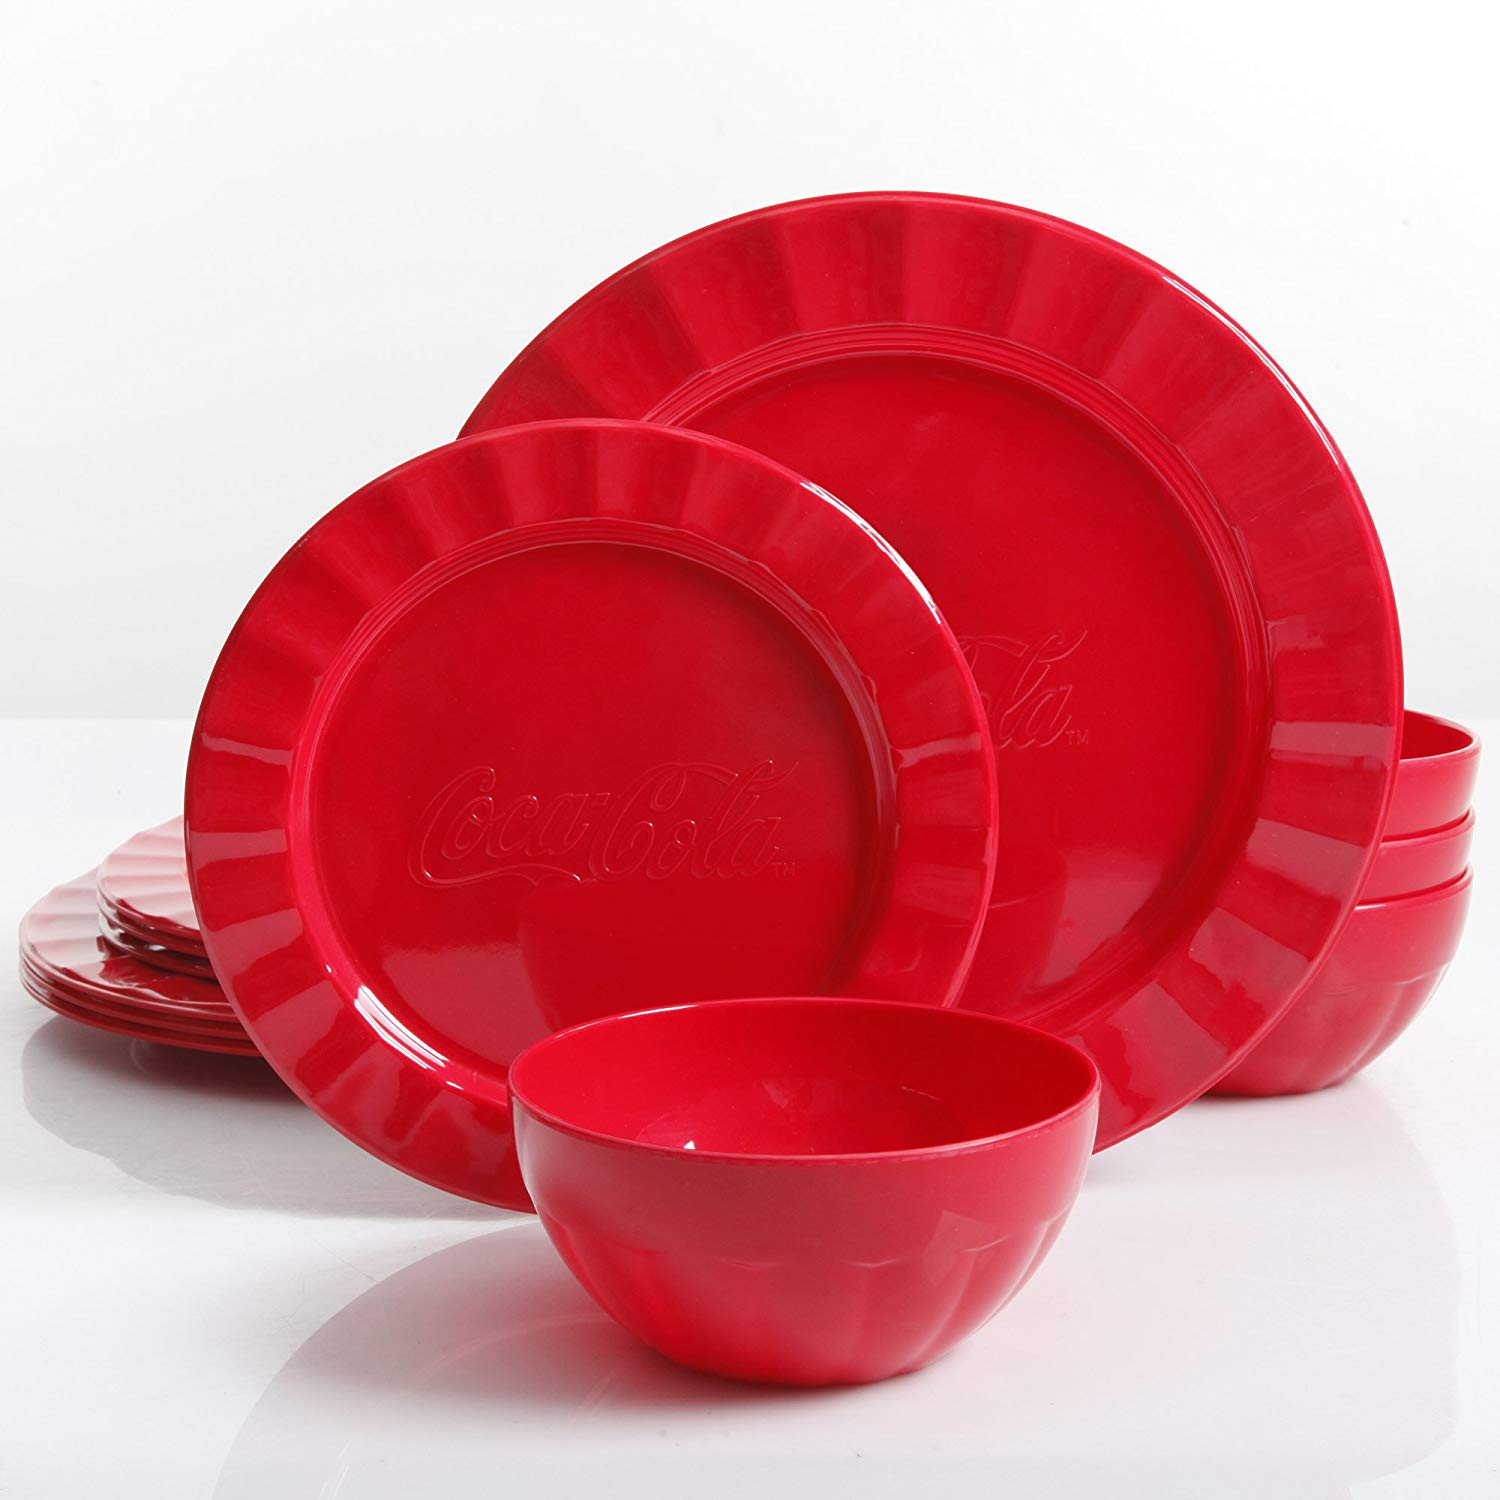 Coca Cola 12 Pcs. Red Durable Melamine Dinner set For 4 Person